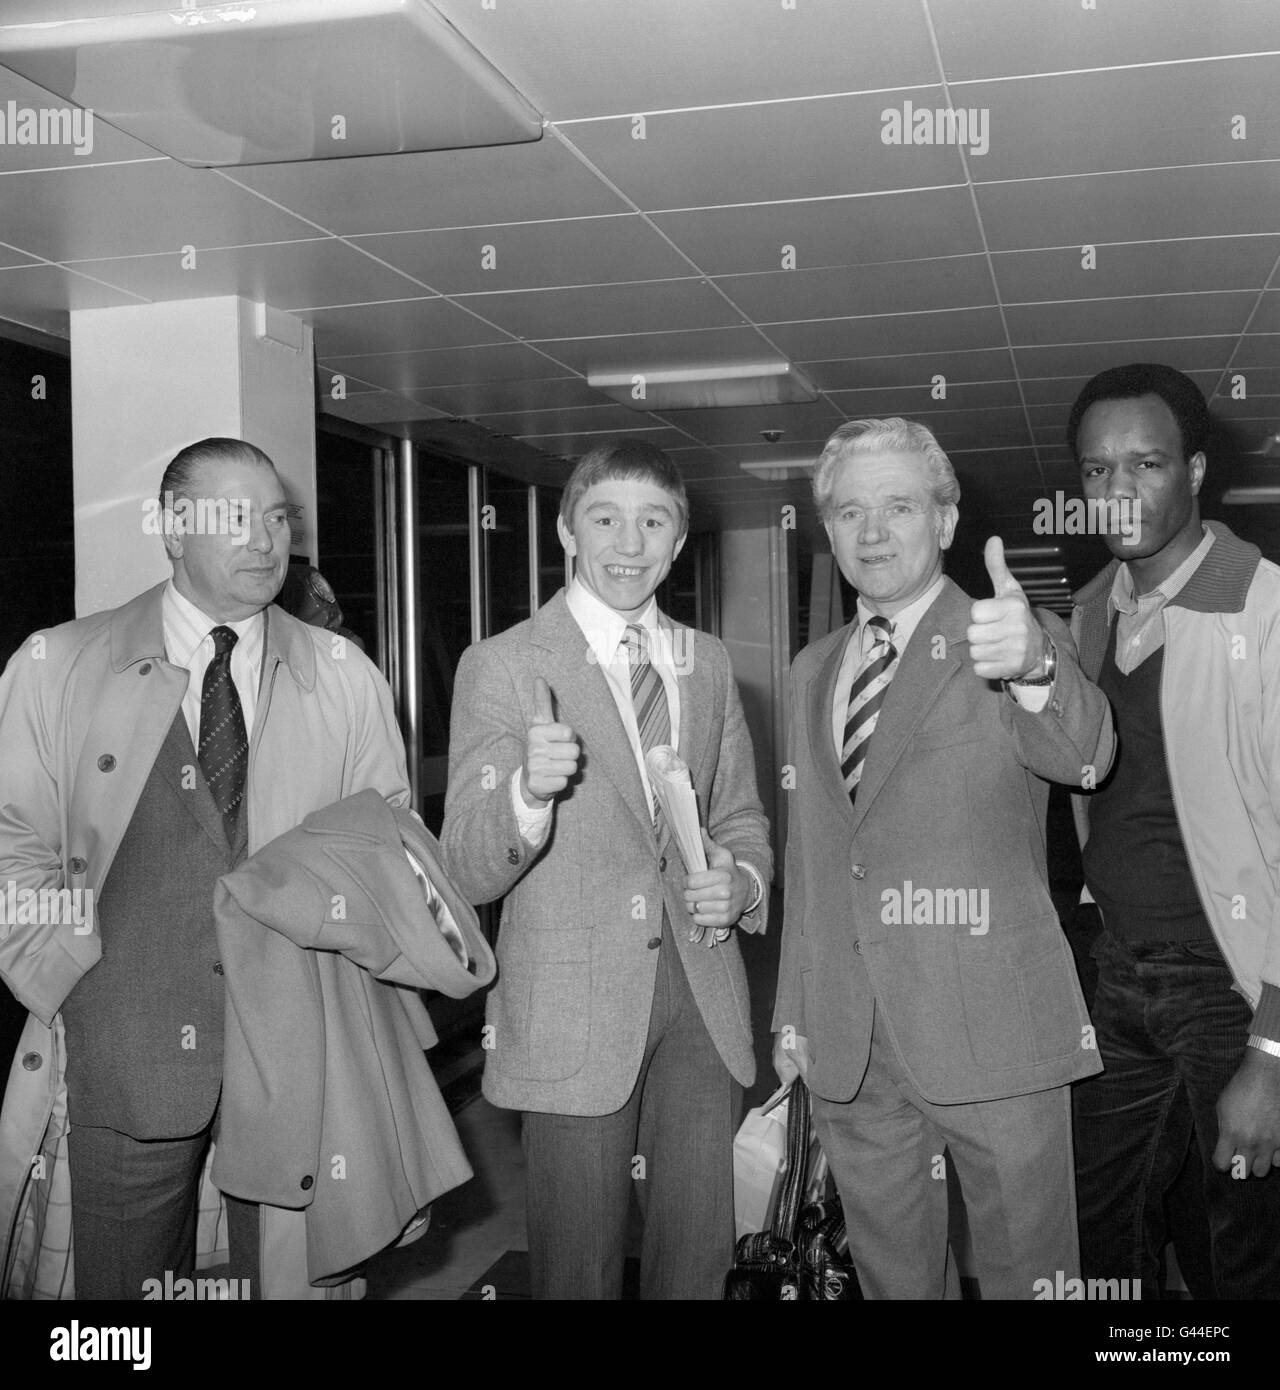 British boxer Dave 'Boy' Green (c-l) and manager Andy Smith (c-r) give the thumbs up as they wait to fly out to America. Dave 'Boy' Green would meet WBC Welterweight Champion Sugar Ray Leonard, but would lose by KO in the 4th round. Stock Photo